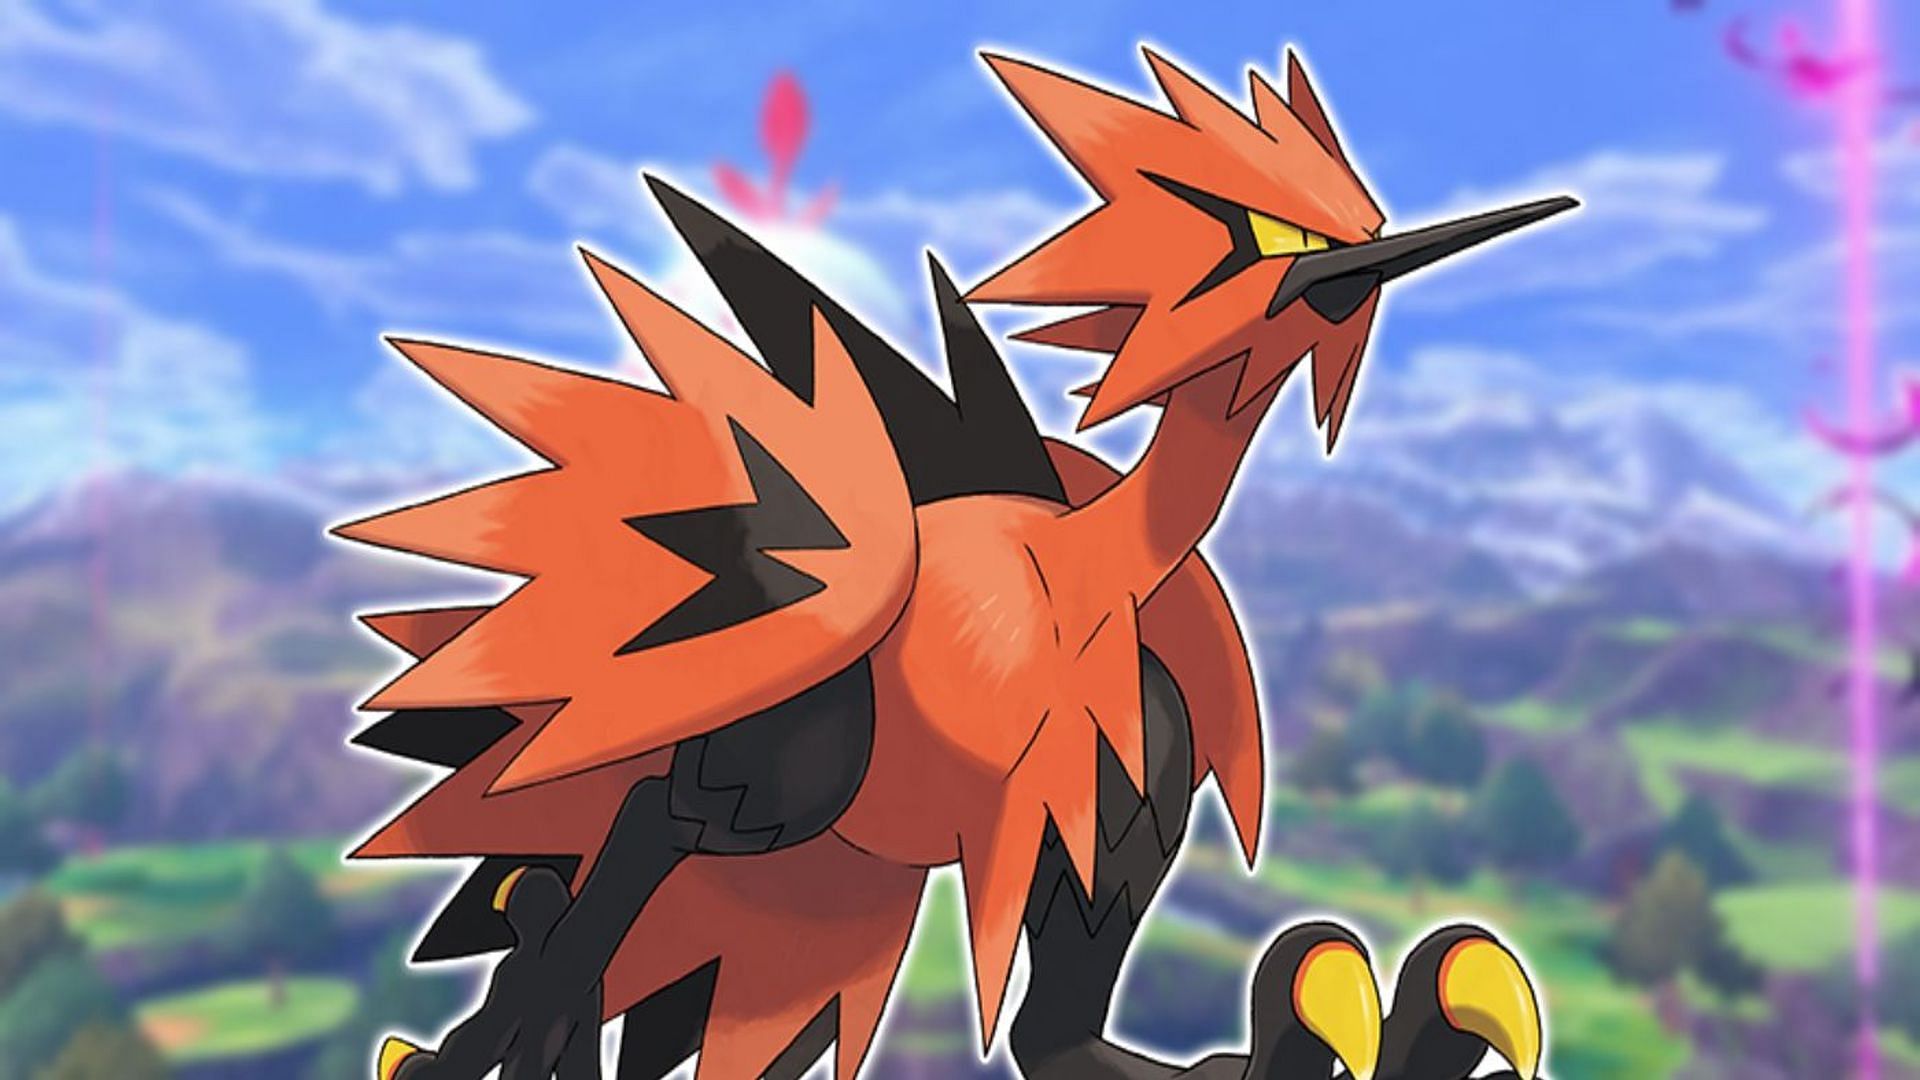 Official artwork for Galarian Zapdos used throughout the franchise (Image via The Pokemon Company)